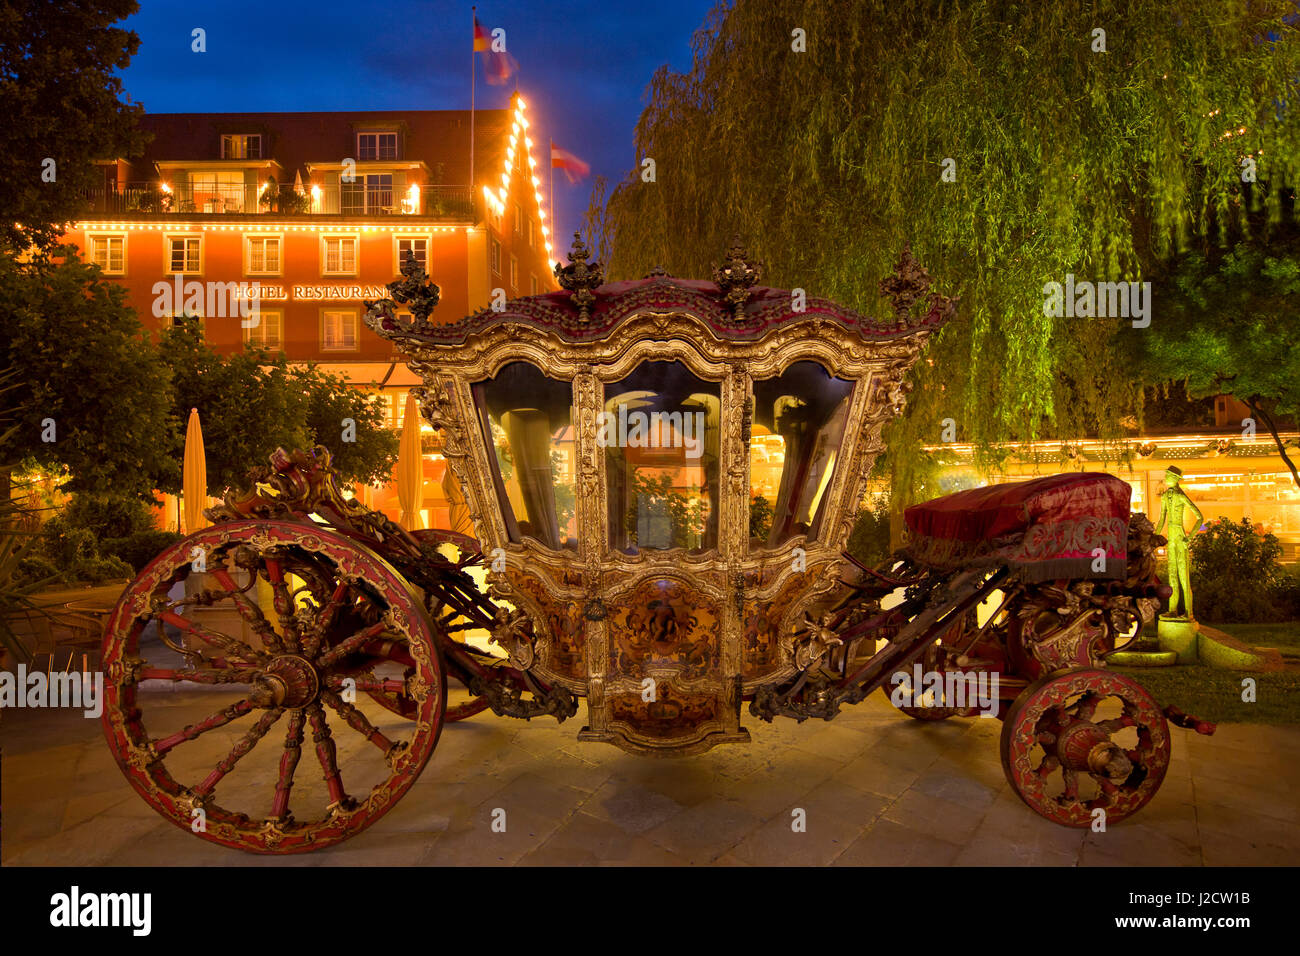 Europe, Germany, Lake Constance. Composite of 18th century carriage in front of modern hotel. Credit as: Jim Zuckerman / Jaynes Gallery / DanitaDelimont.com Stock Photo